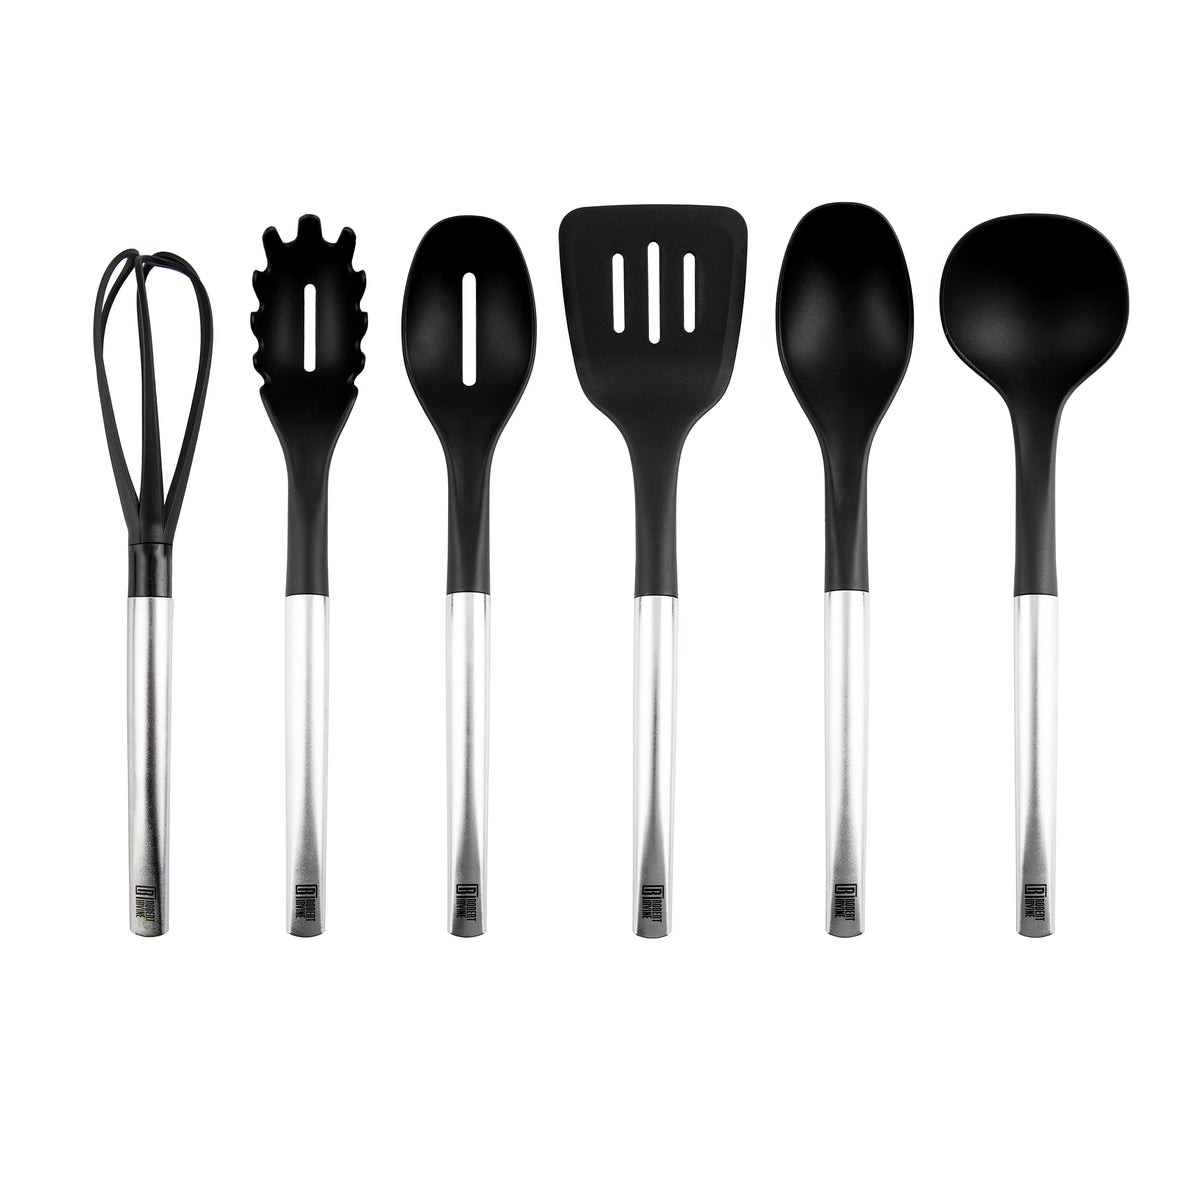 10pc Silicone Kitchen Utensils Set Cookware High Temperature Resistant Non-Stick Wooden Handle Silicone Baking Tool Ruya Company